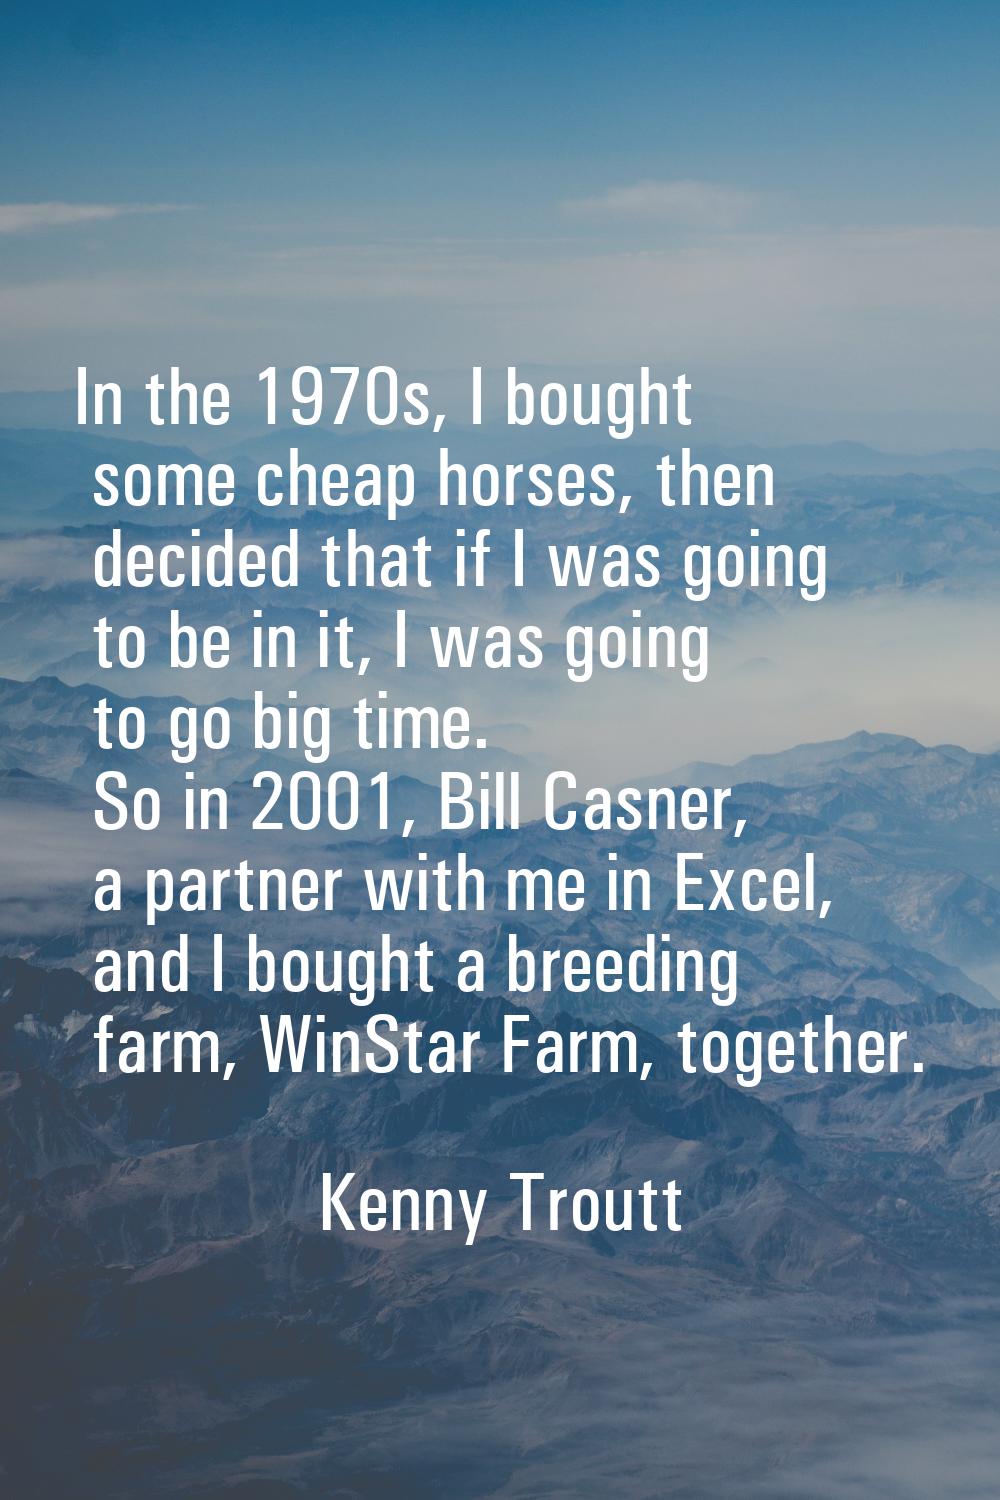 In the 1970s, I bought some cheap horses, then decided that if I was going to be in it, I was going